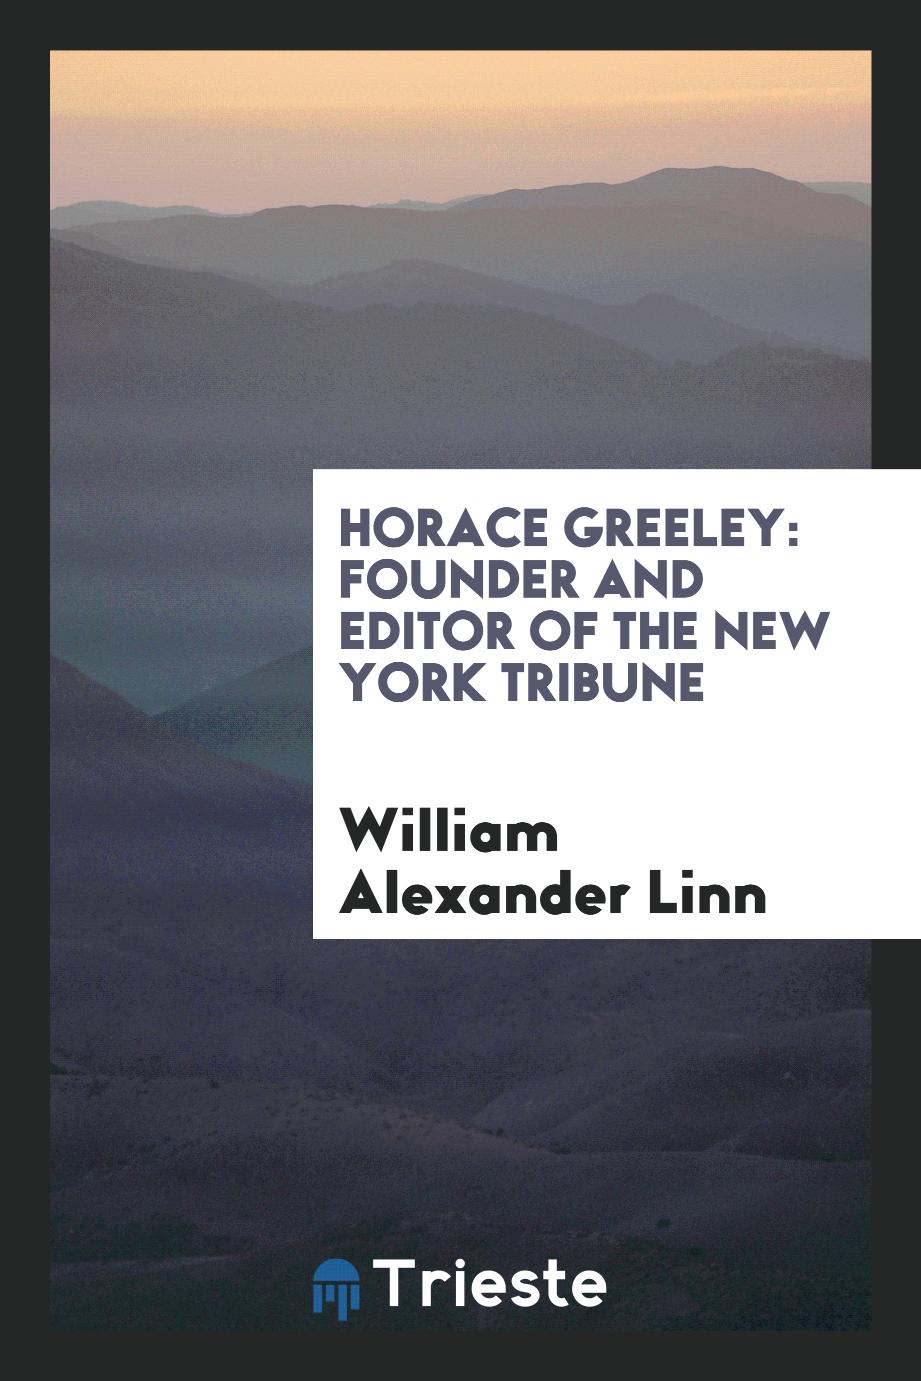 Horace Greeley: founder and editor of the New York Tribune